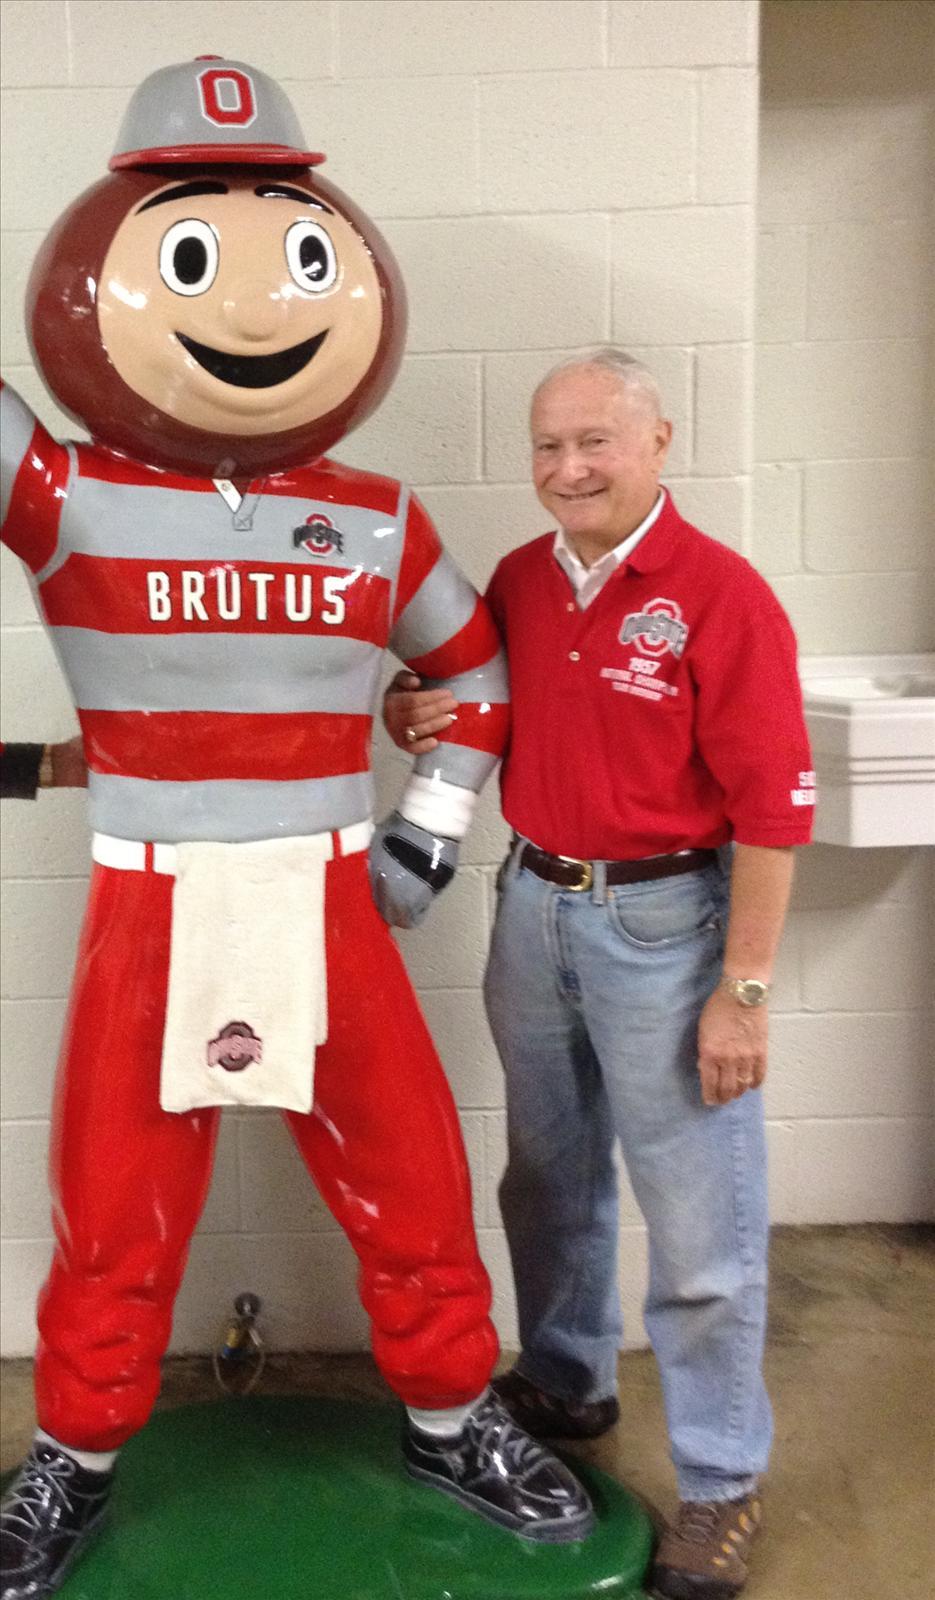 Posted by Bucky Brutus